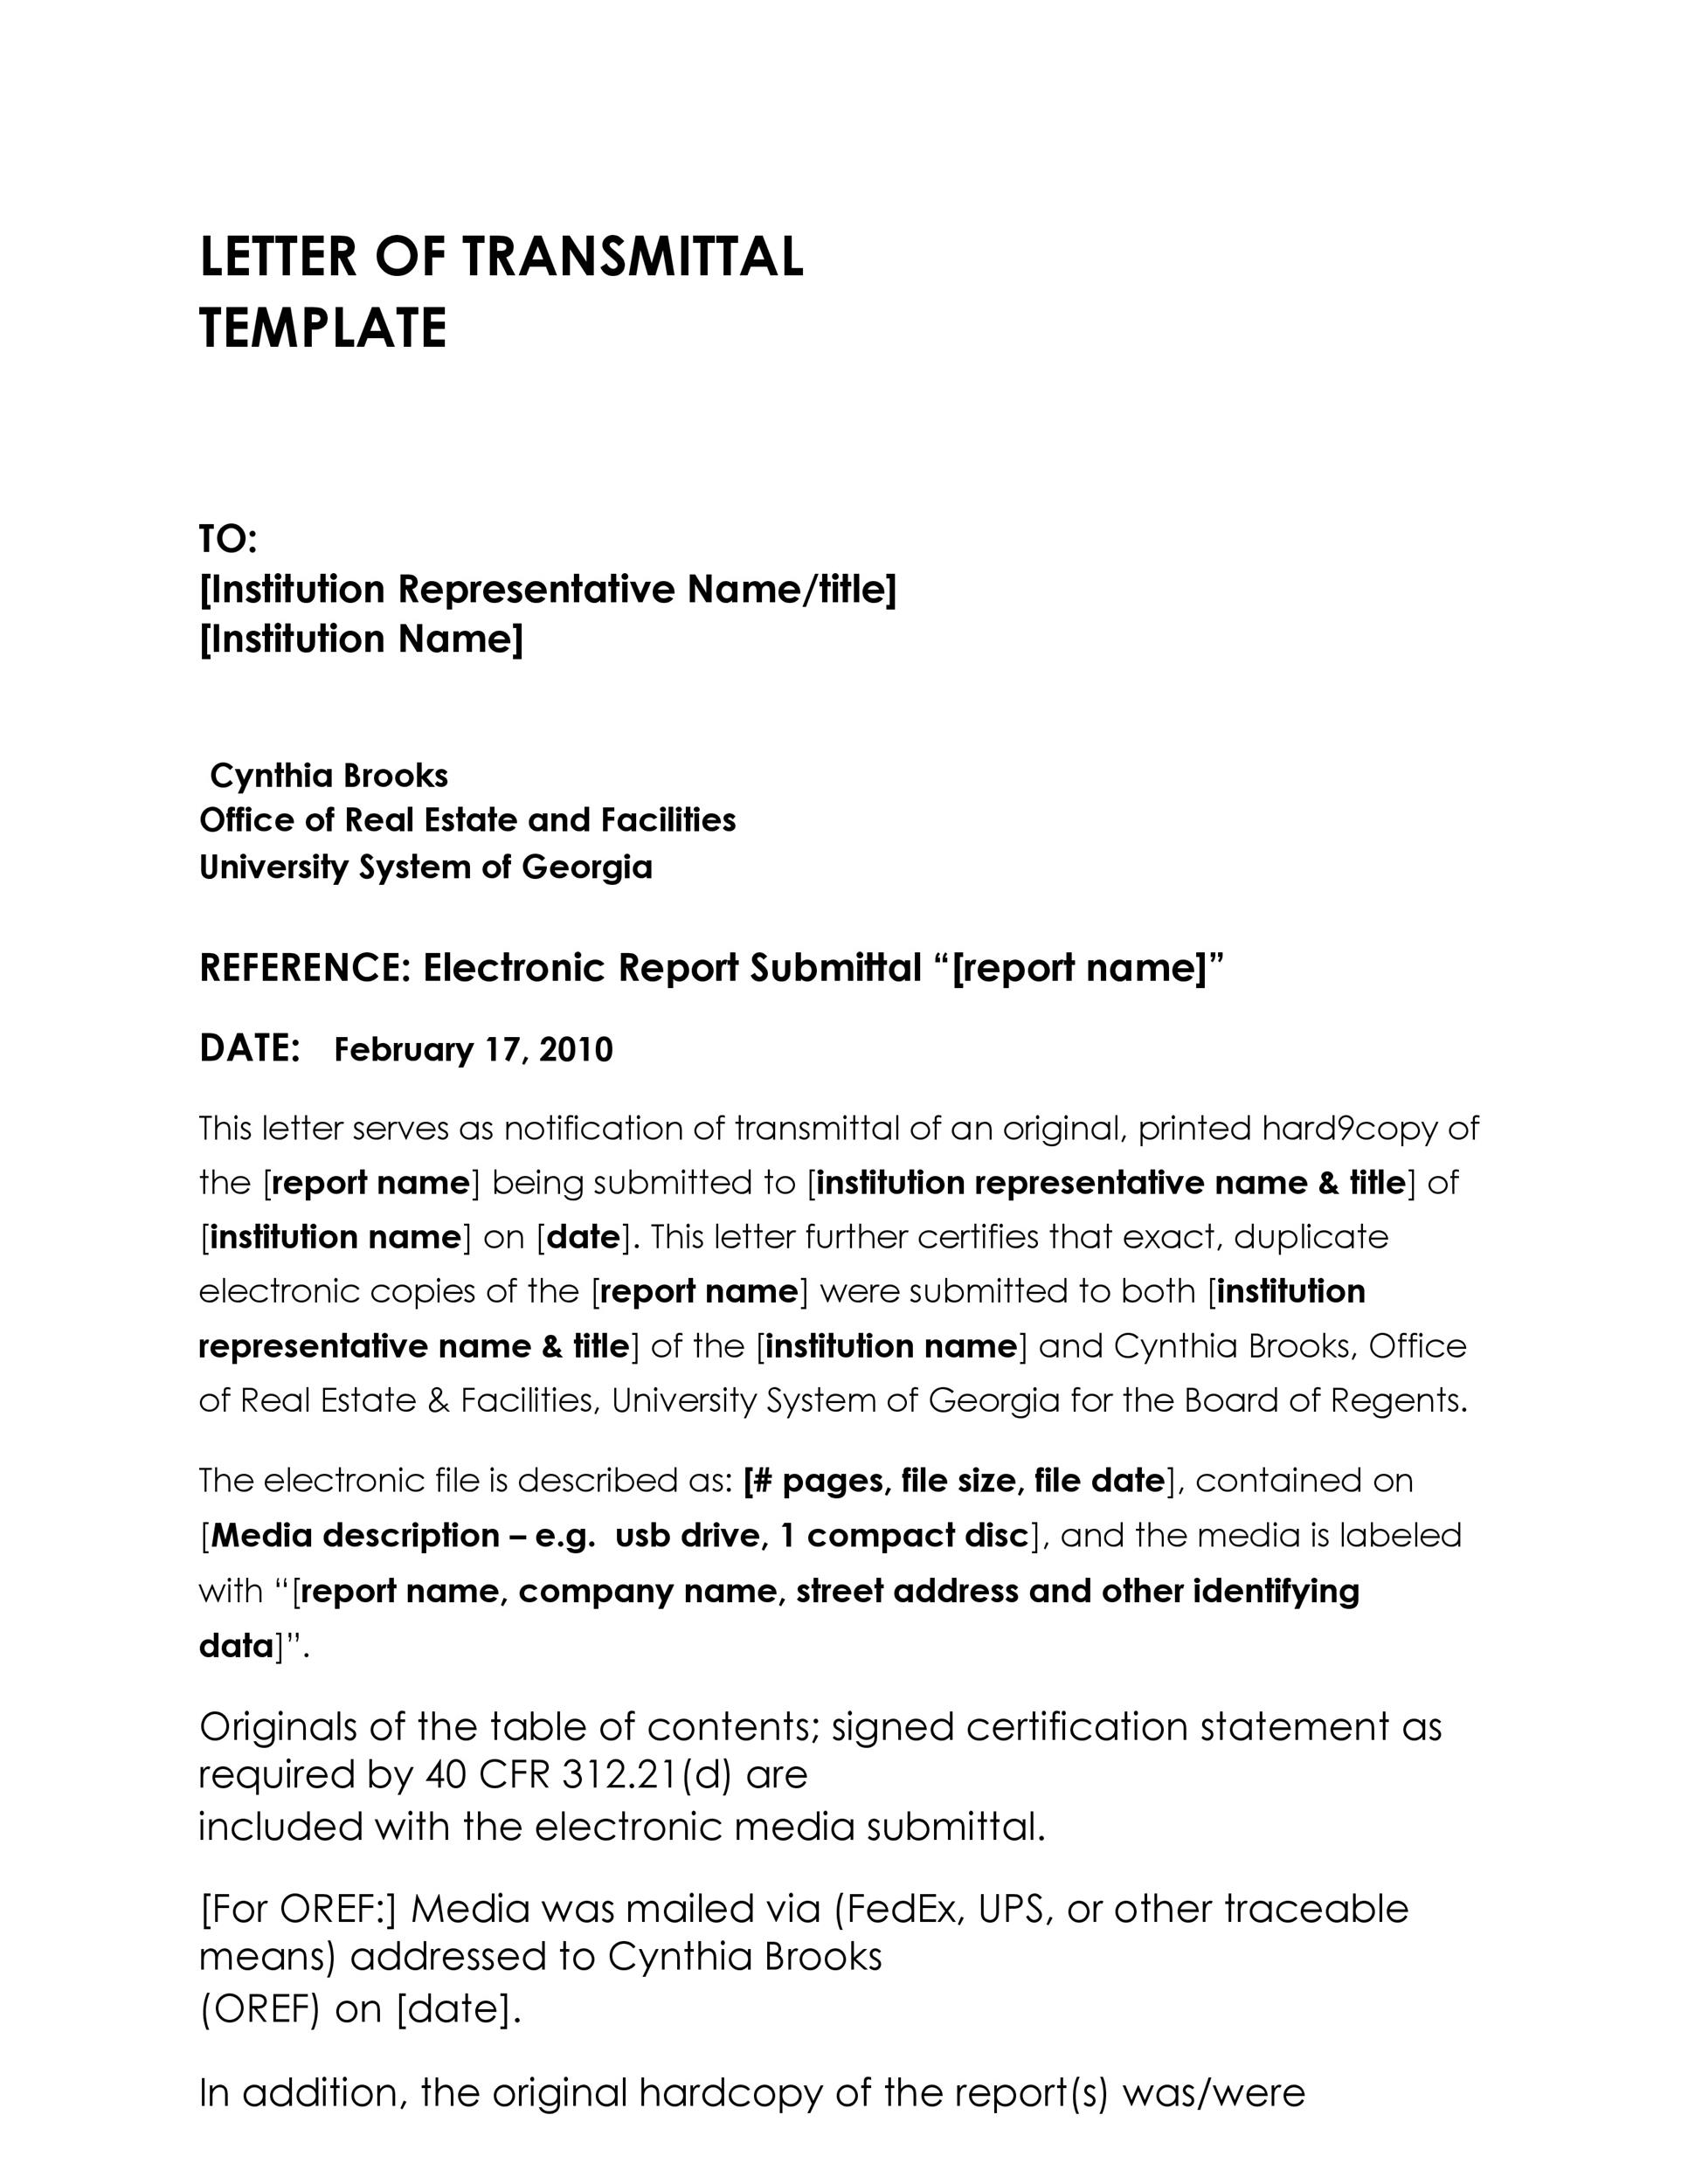 Letter Of Transmittal Sample For A Report